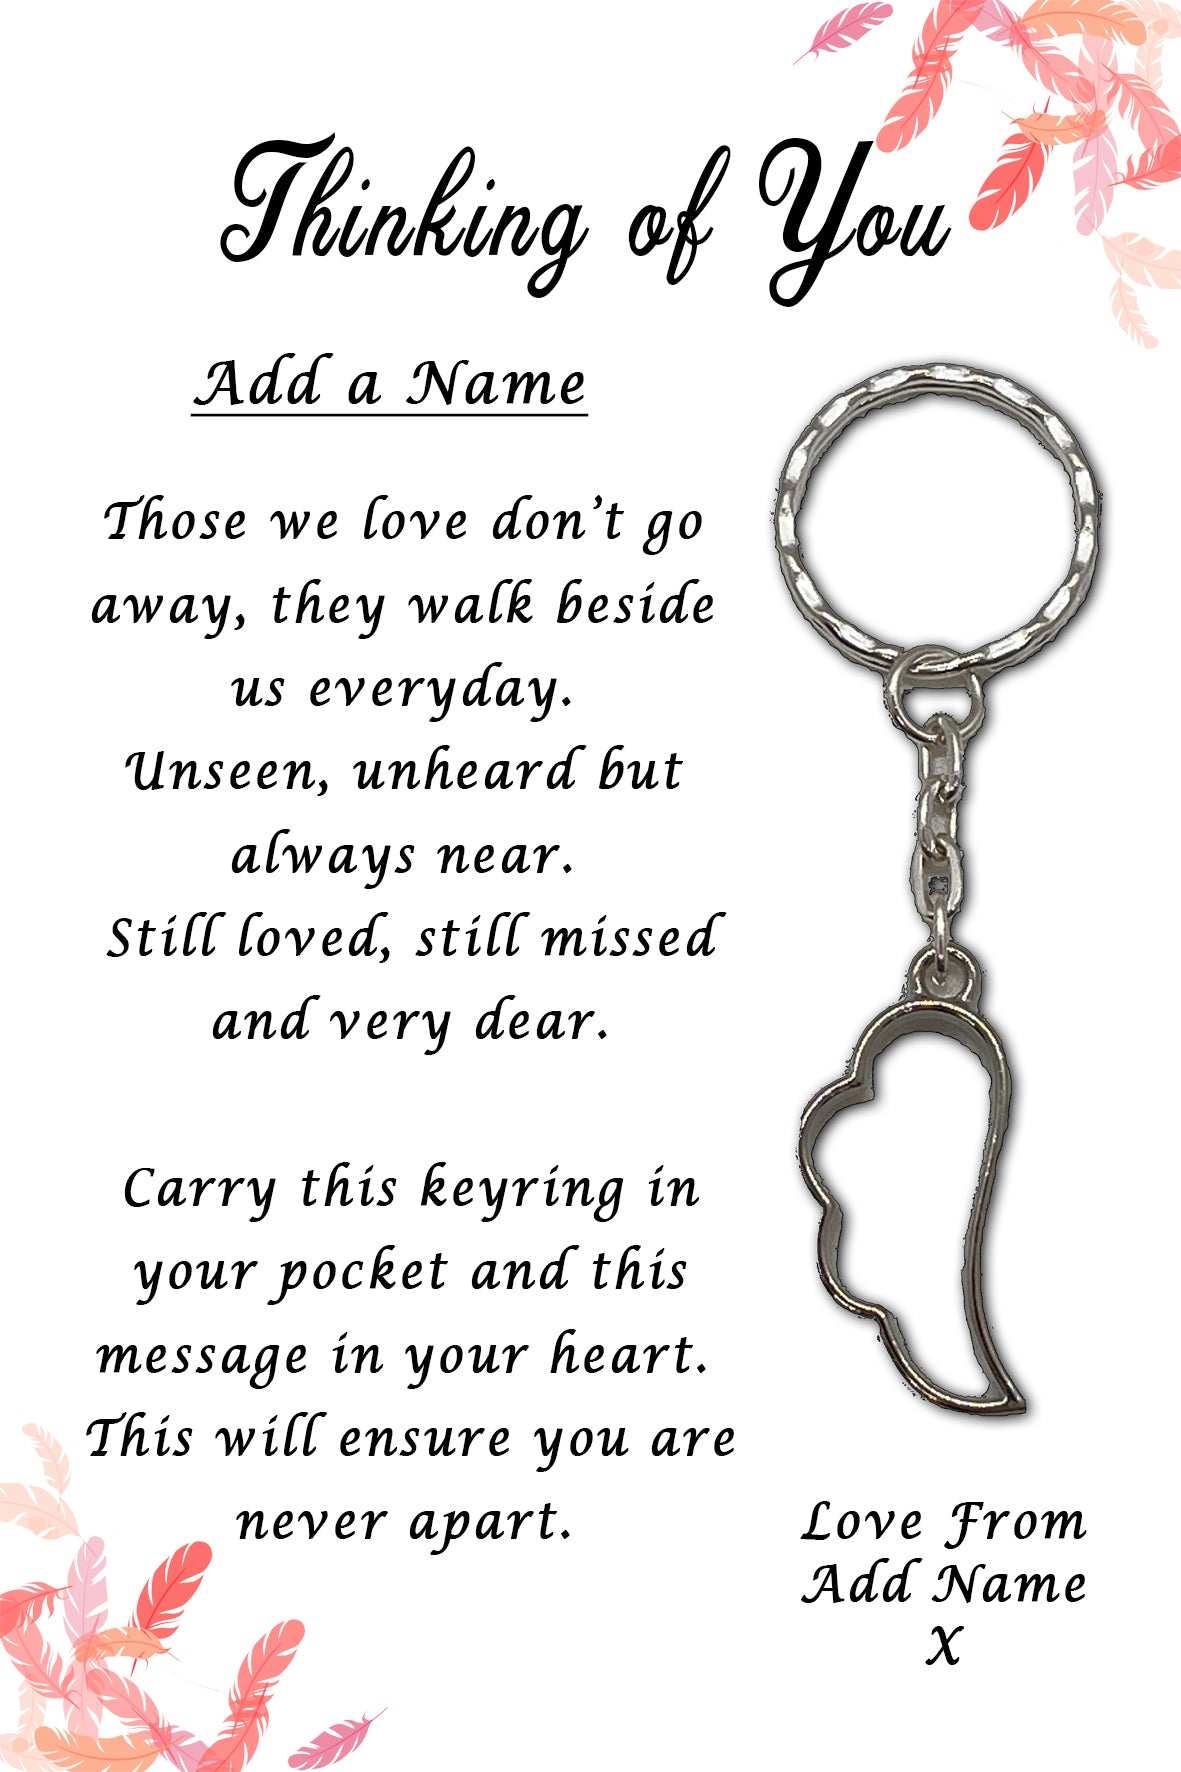 Thinking of You Angel Wing Keyrings & Pink Feather Personalised Cards